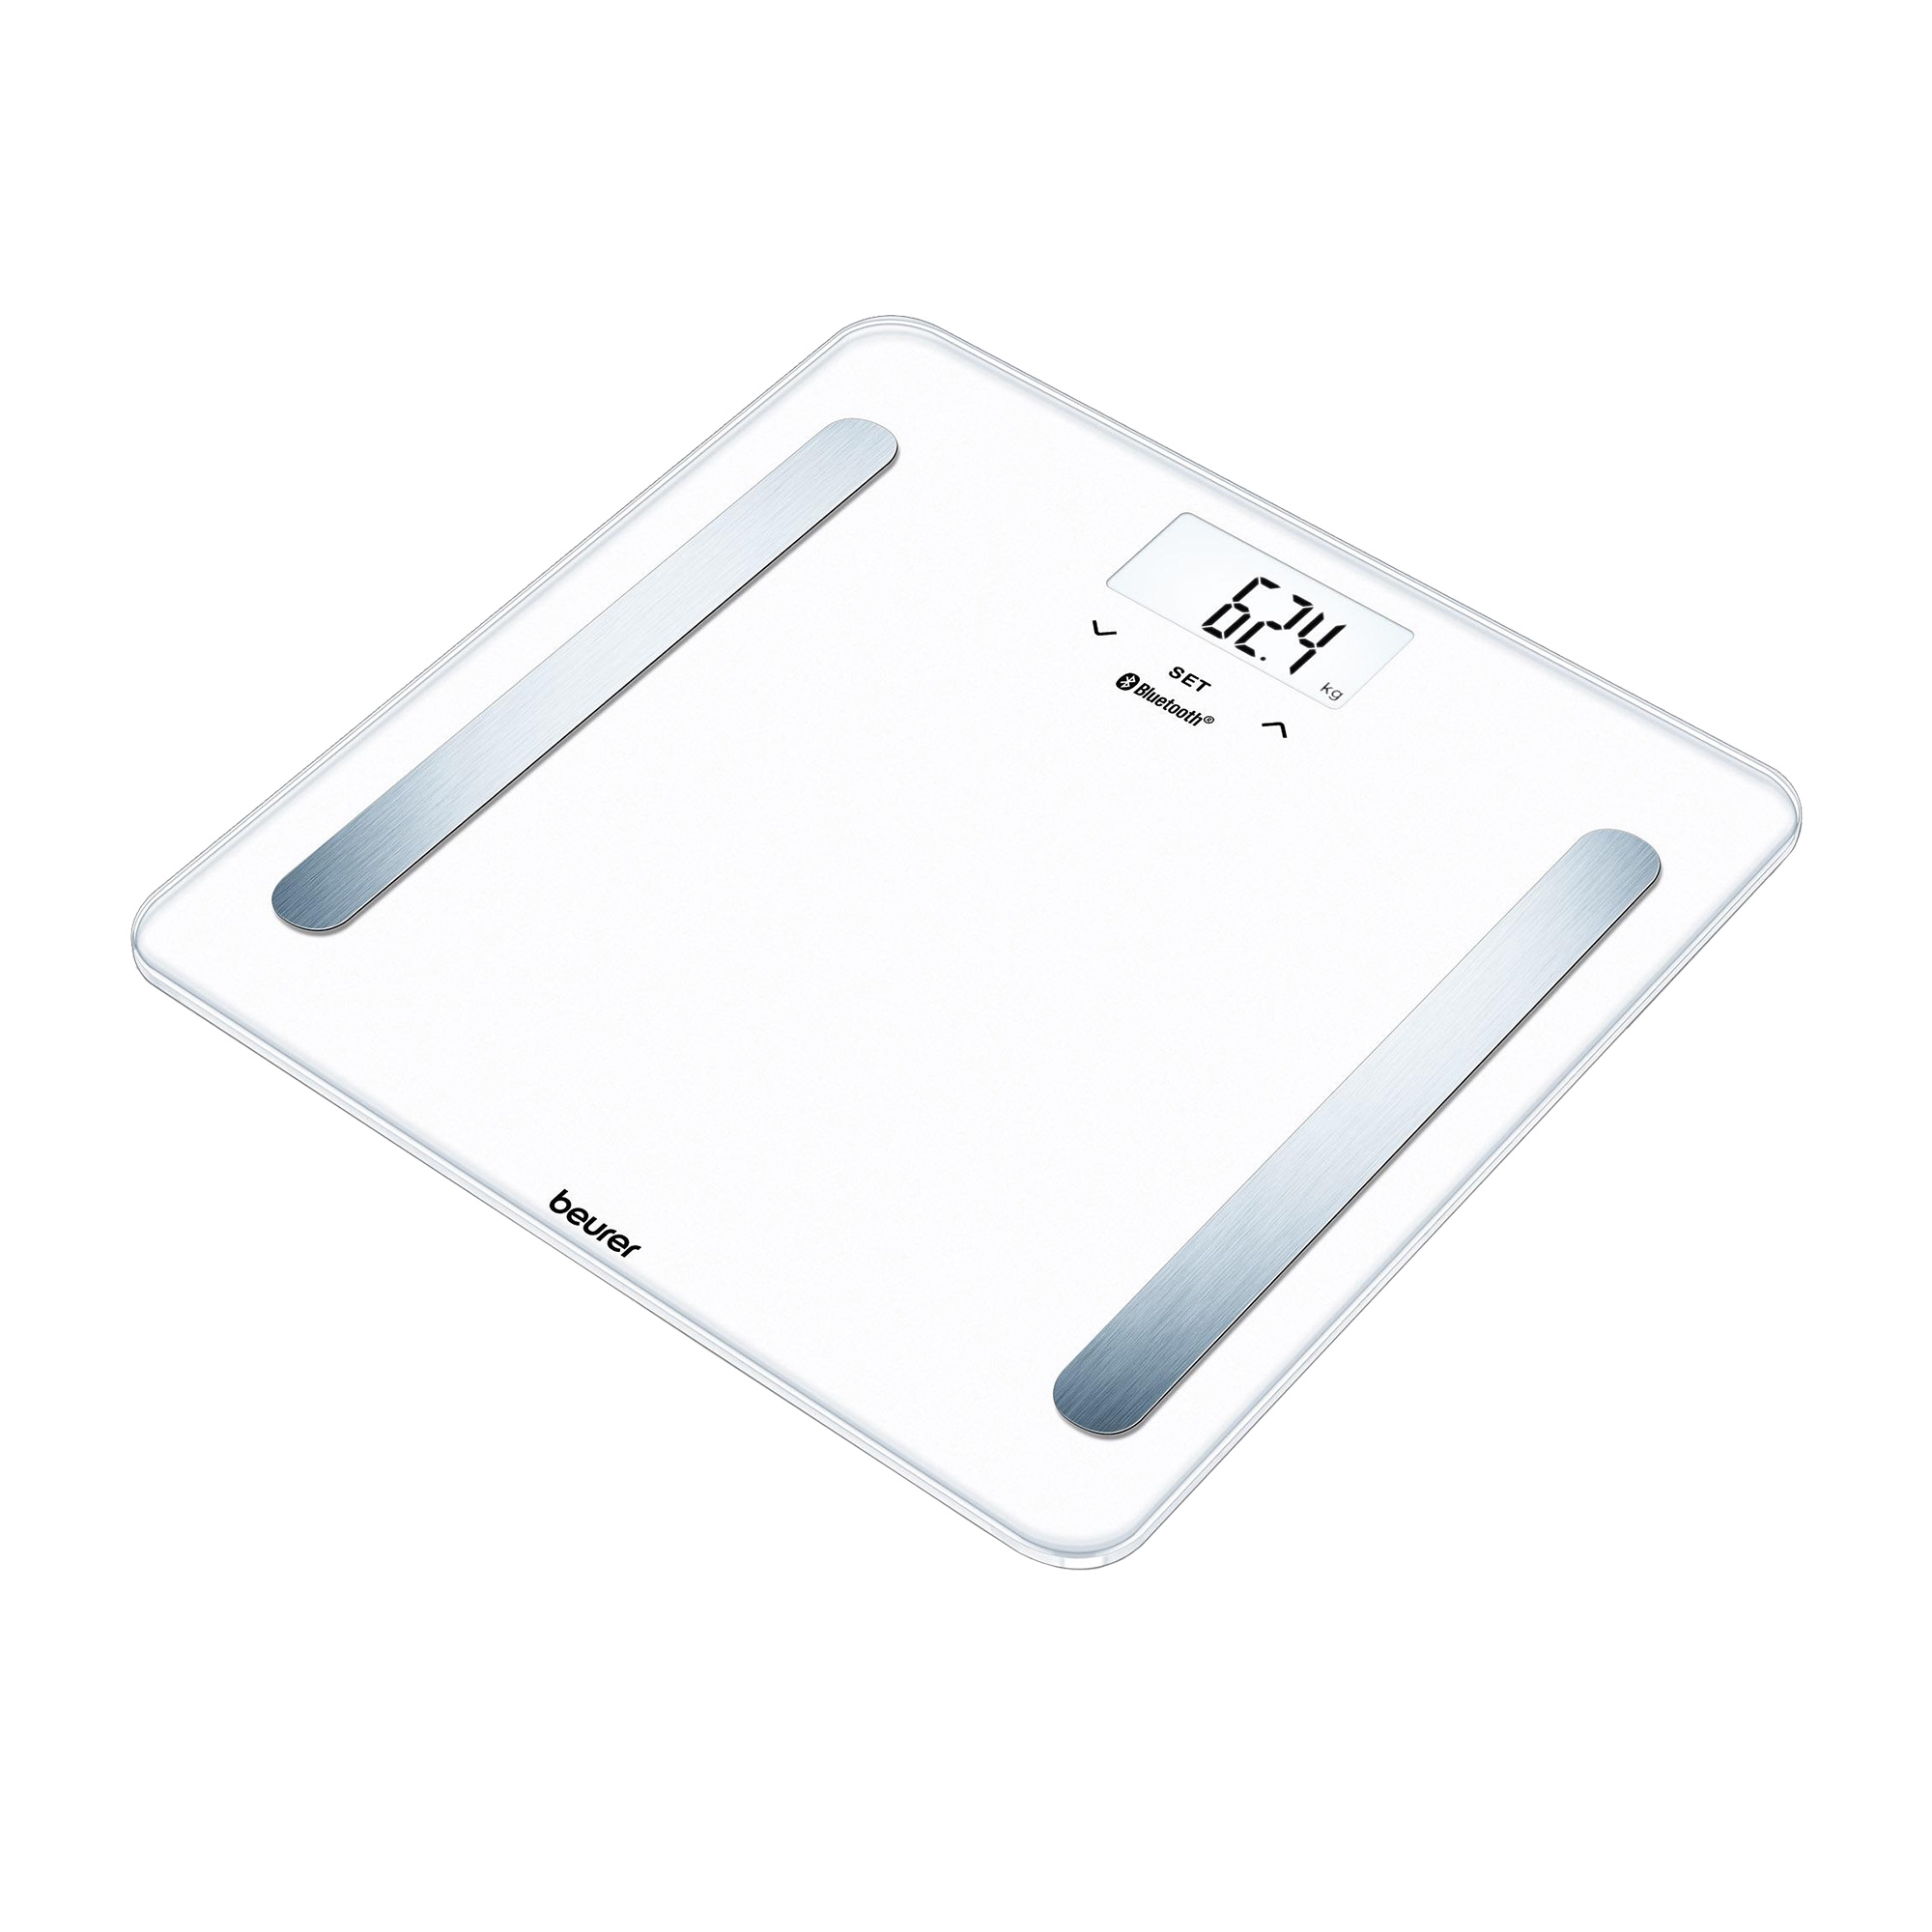 Beurer Bluetooth Glass Body Fat Bathroom Scale White Image 1